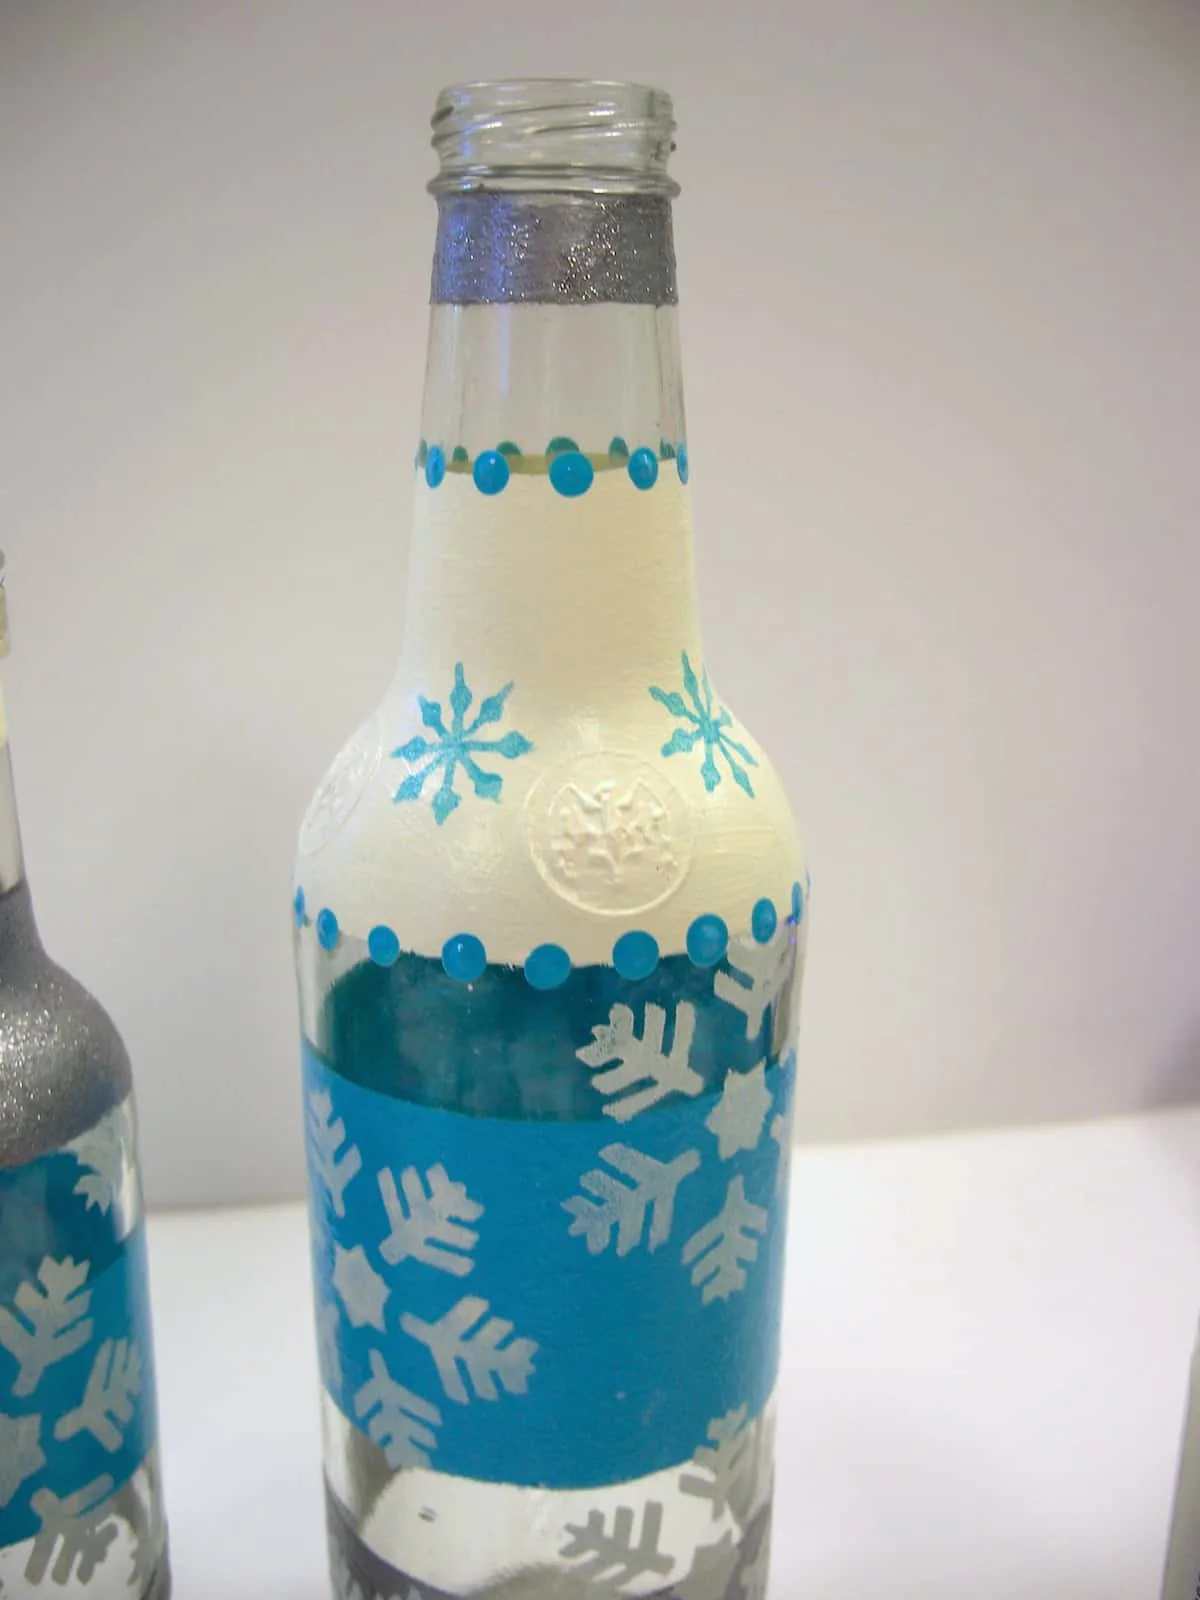 Clear glass bottle painted with cream and silver stripes and blue polka dots